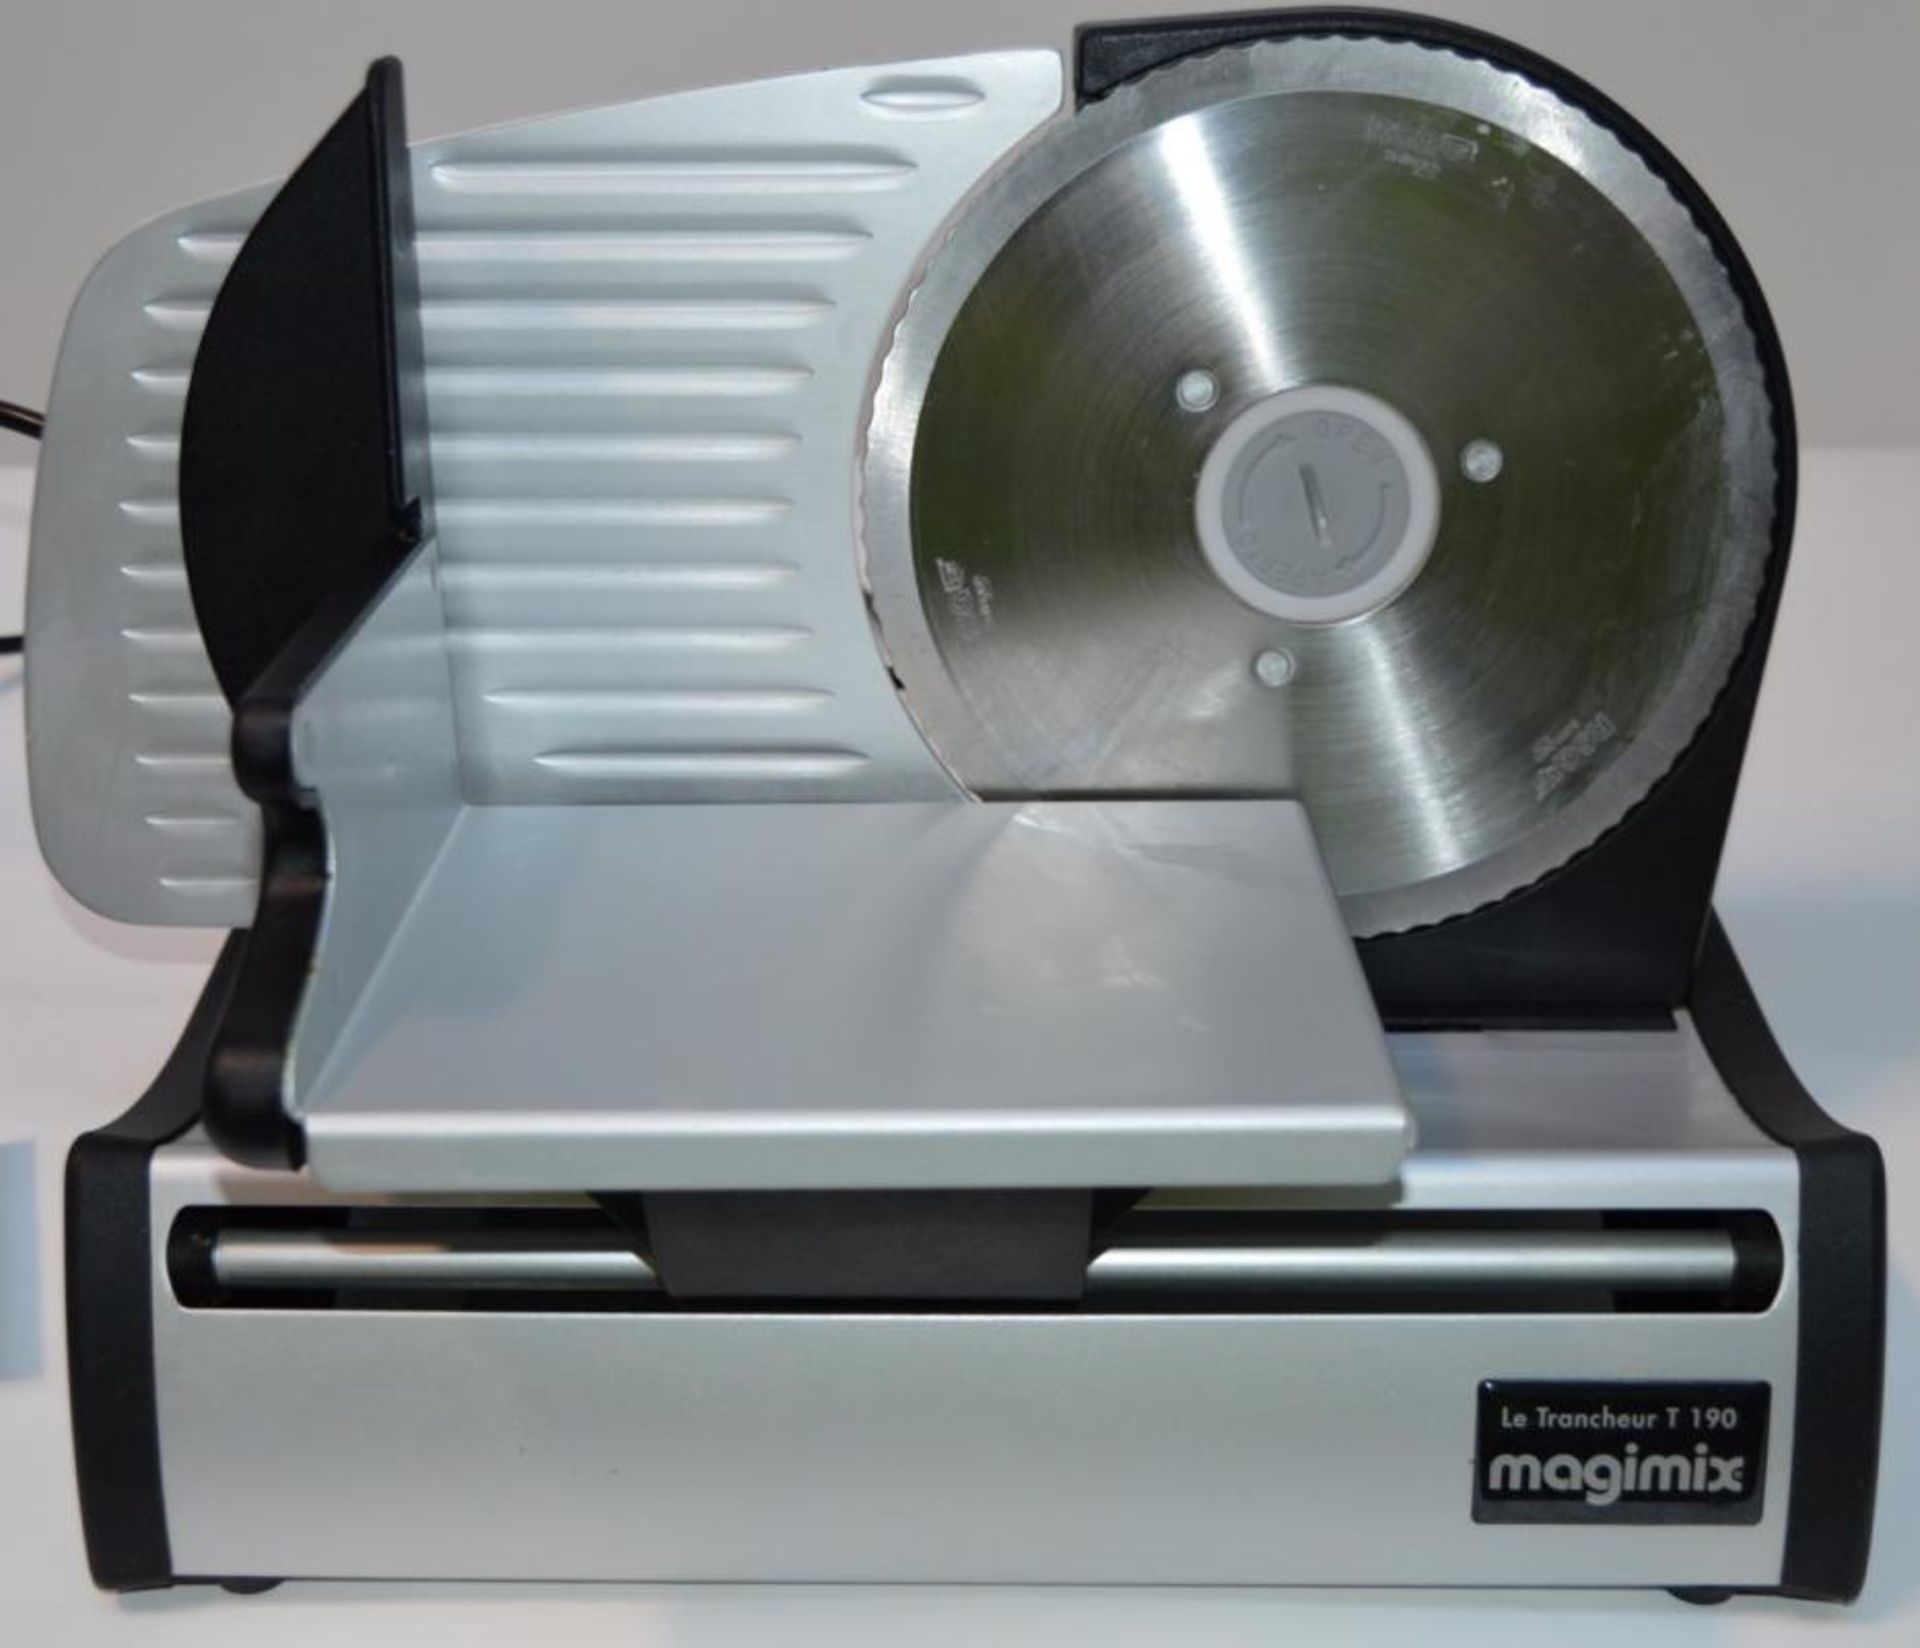 1 x Magimix 11650 T190 Stainless Steel Work Top Food Slicer - CL010 - Excellent Clean Condition - Id - Image 5 of 8